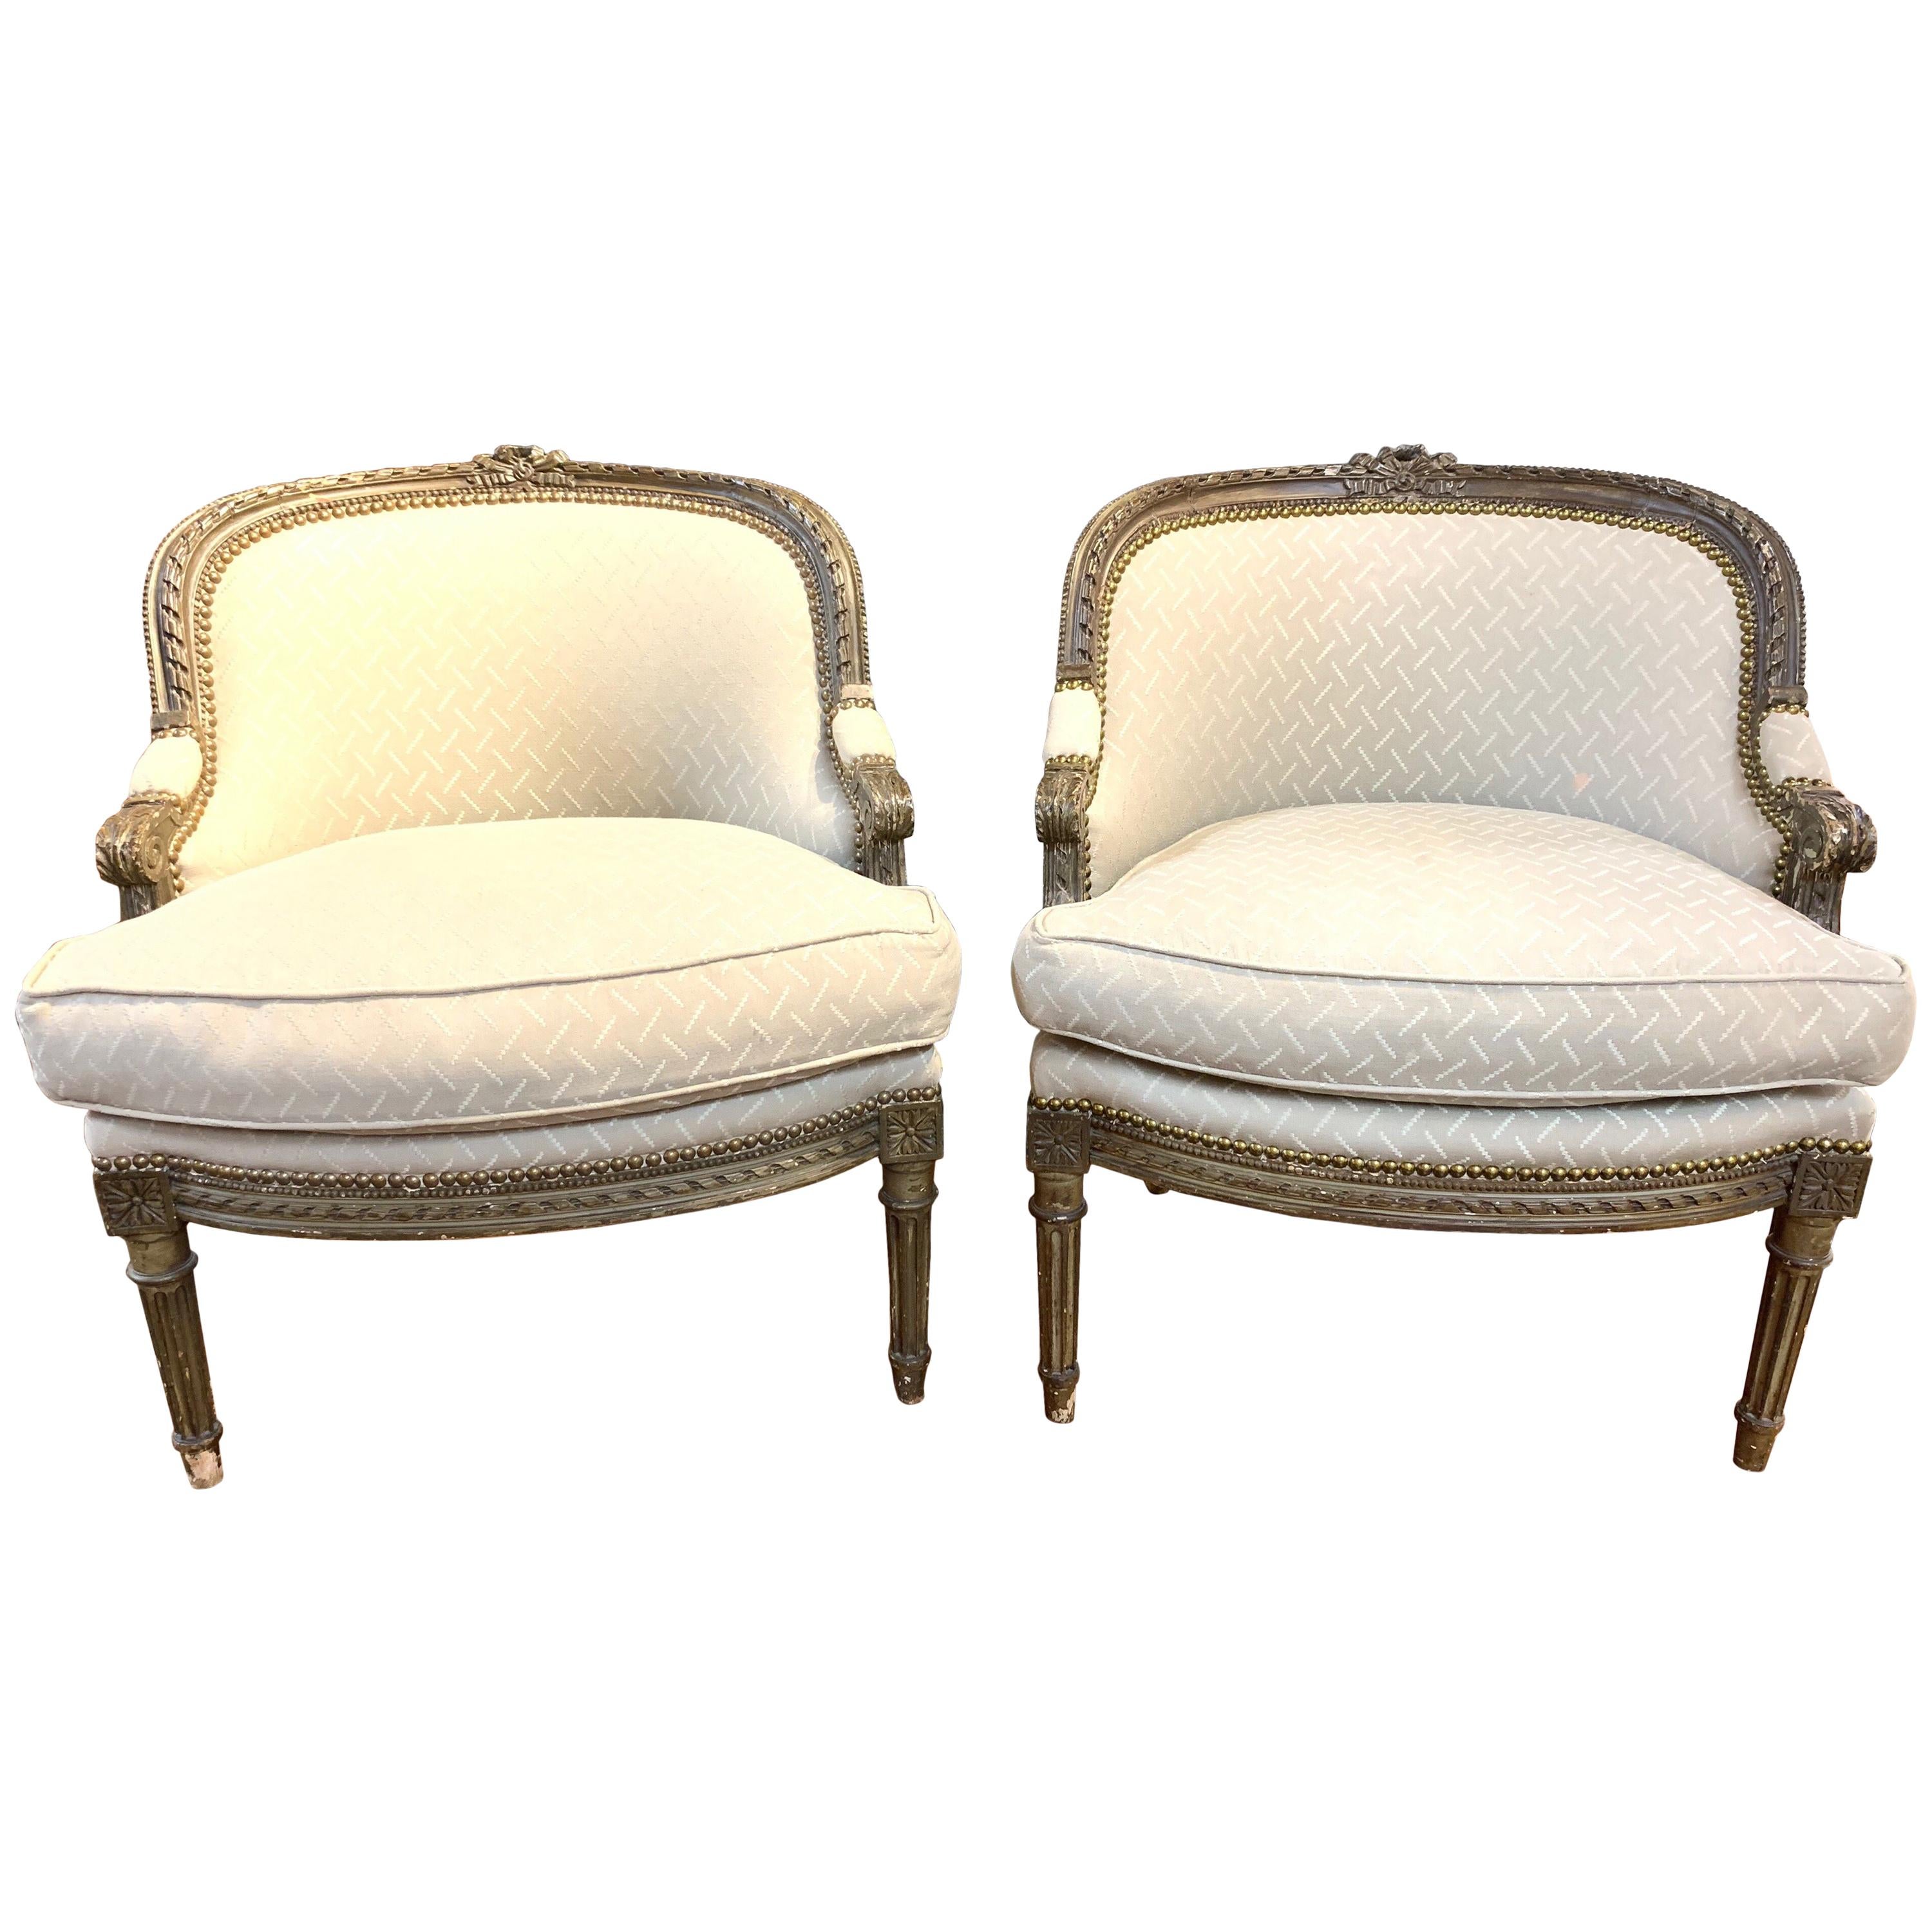 Pair of Petite 19th Century French XVI Style Carved Chairs